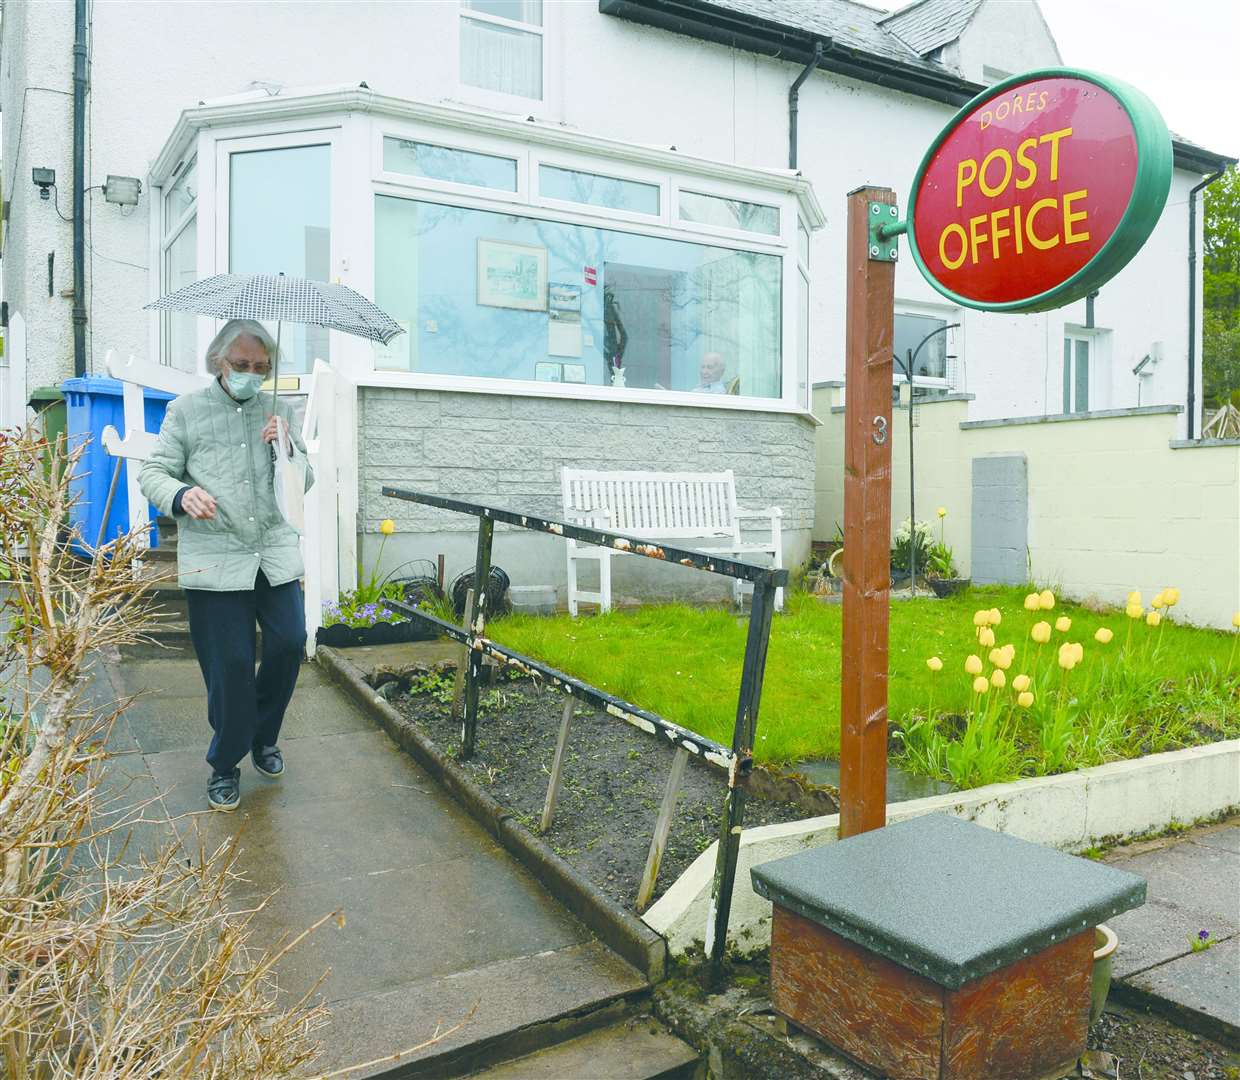 The Post Office said it will look at alternative provision following the closure of Dores Post Office.